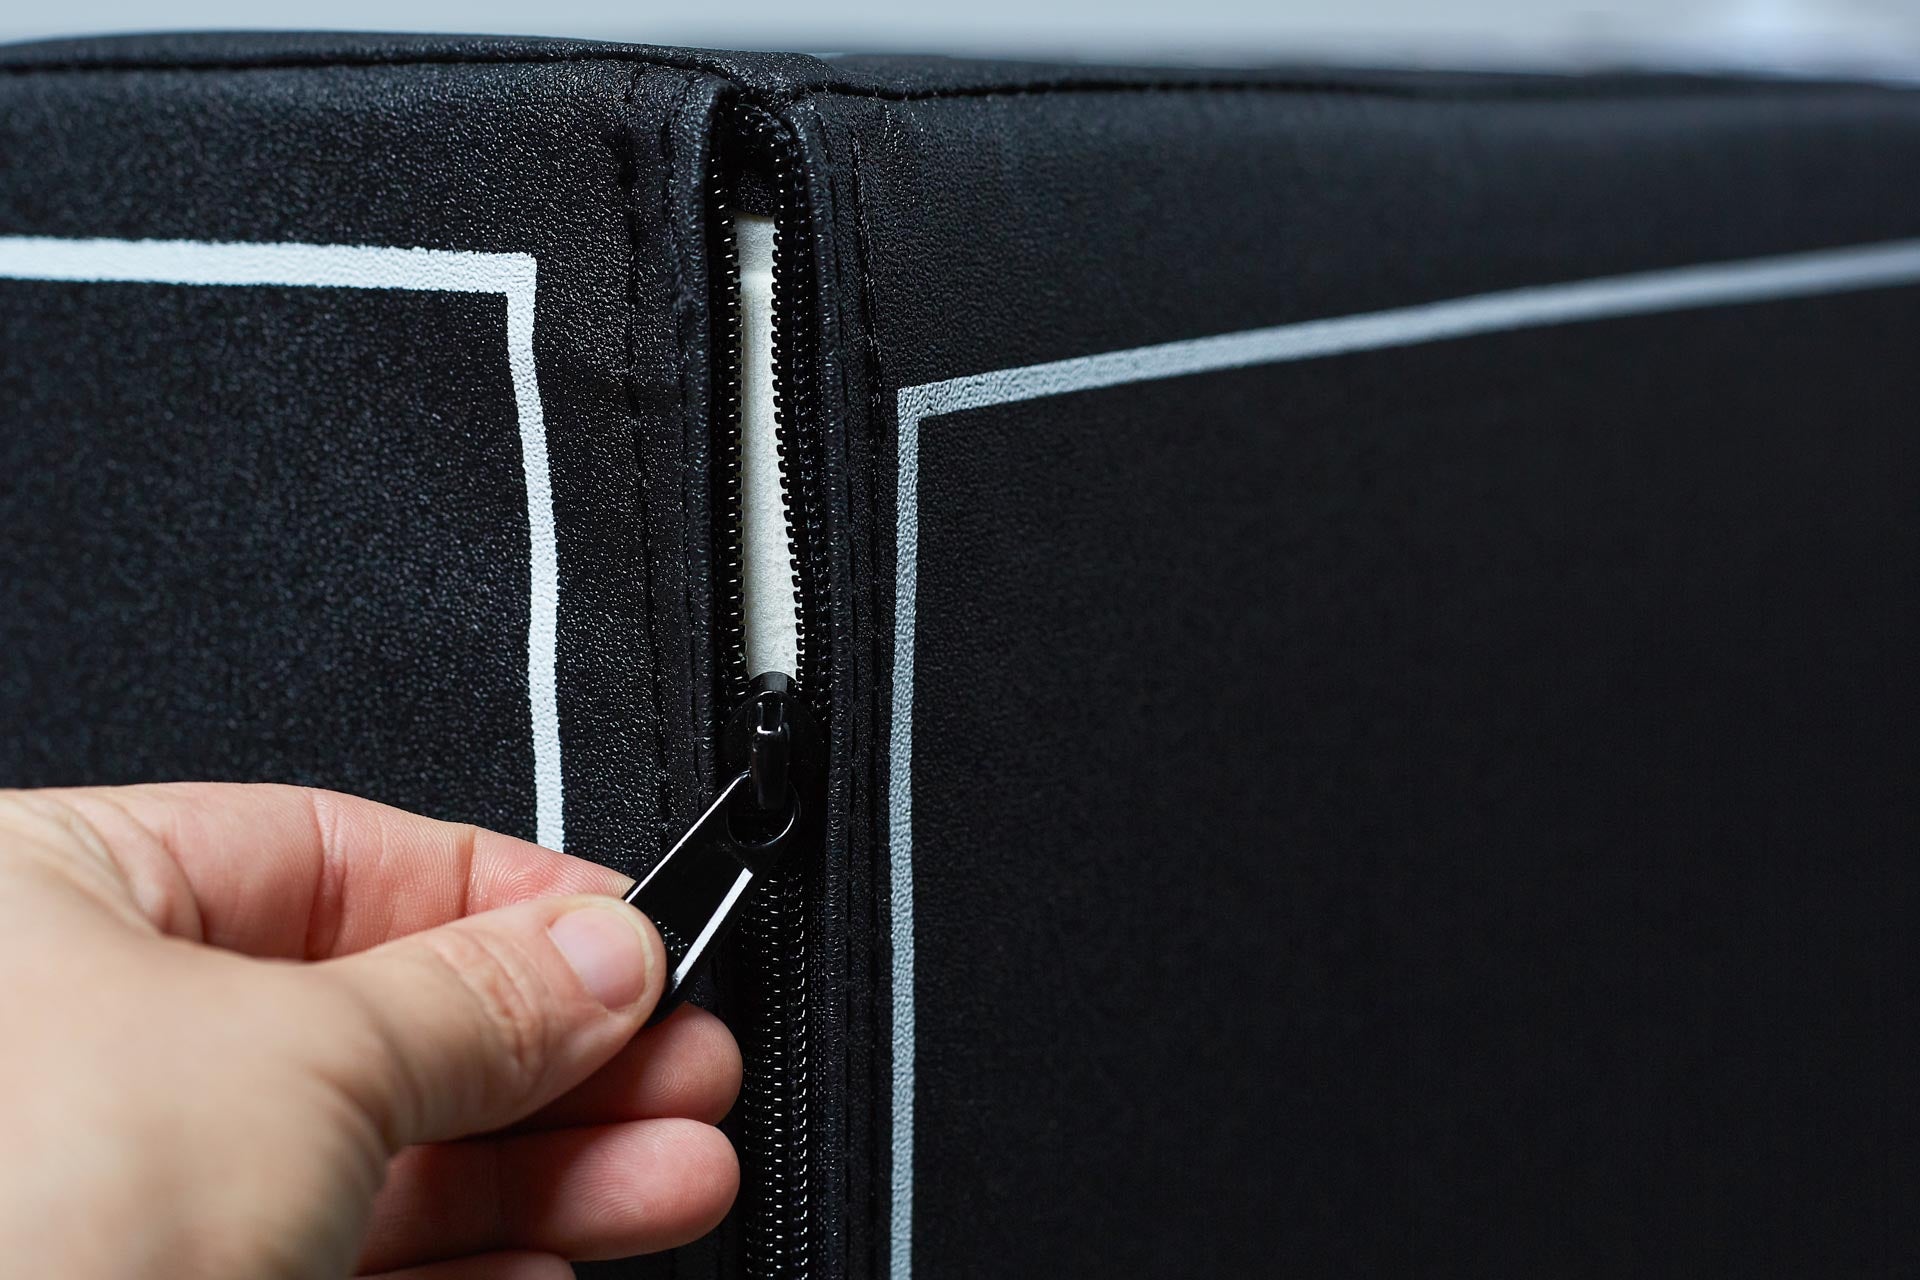 Close-up view of an individual unzipping the soft plyo box to show the soft foam cover.